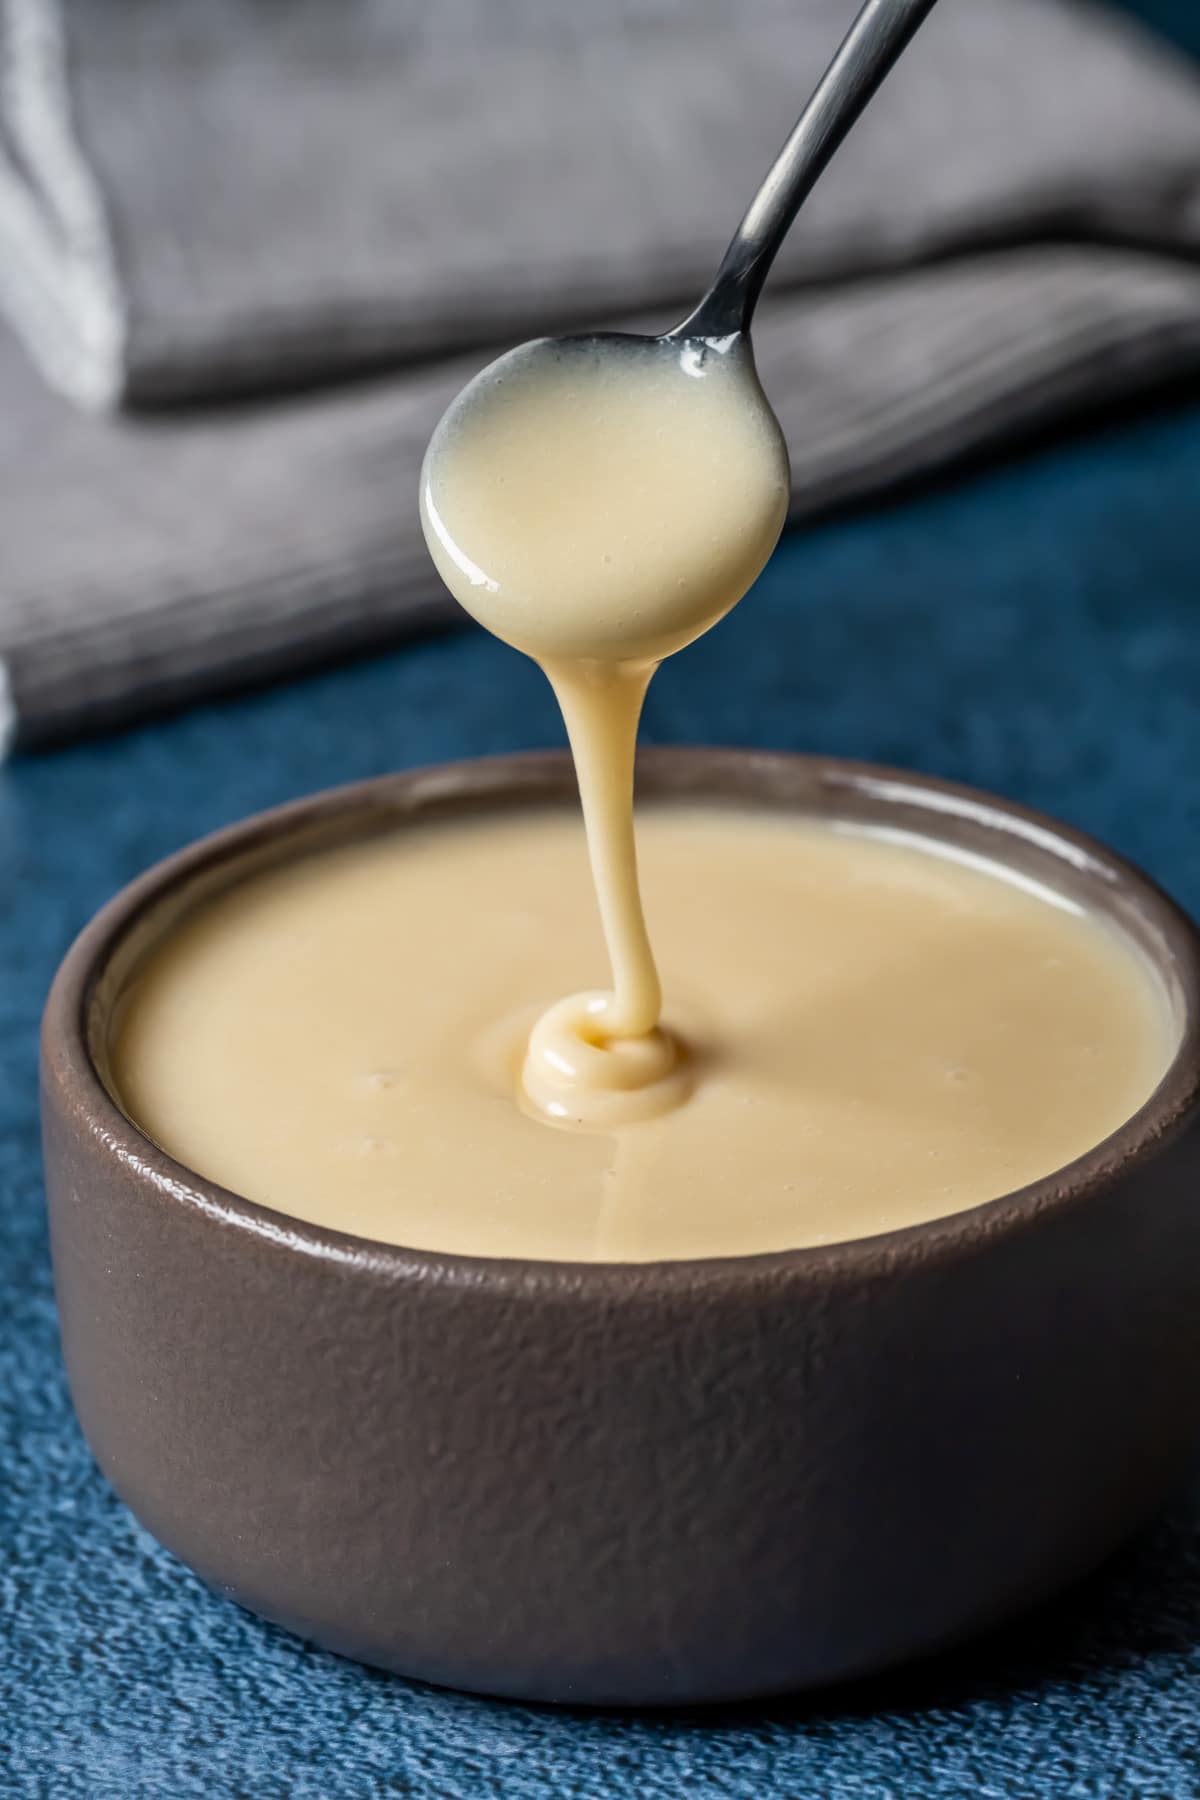 Vegan condensed milk in a brown bowl with a spoon.